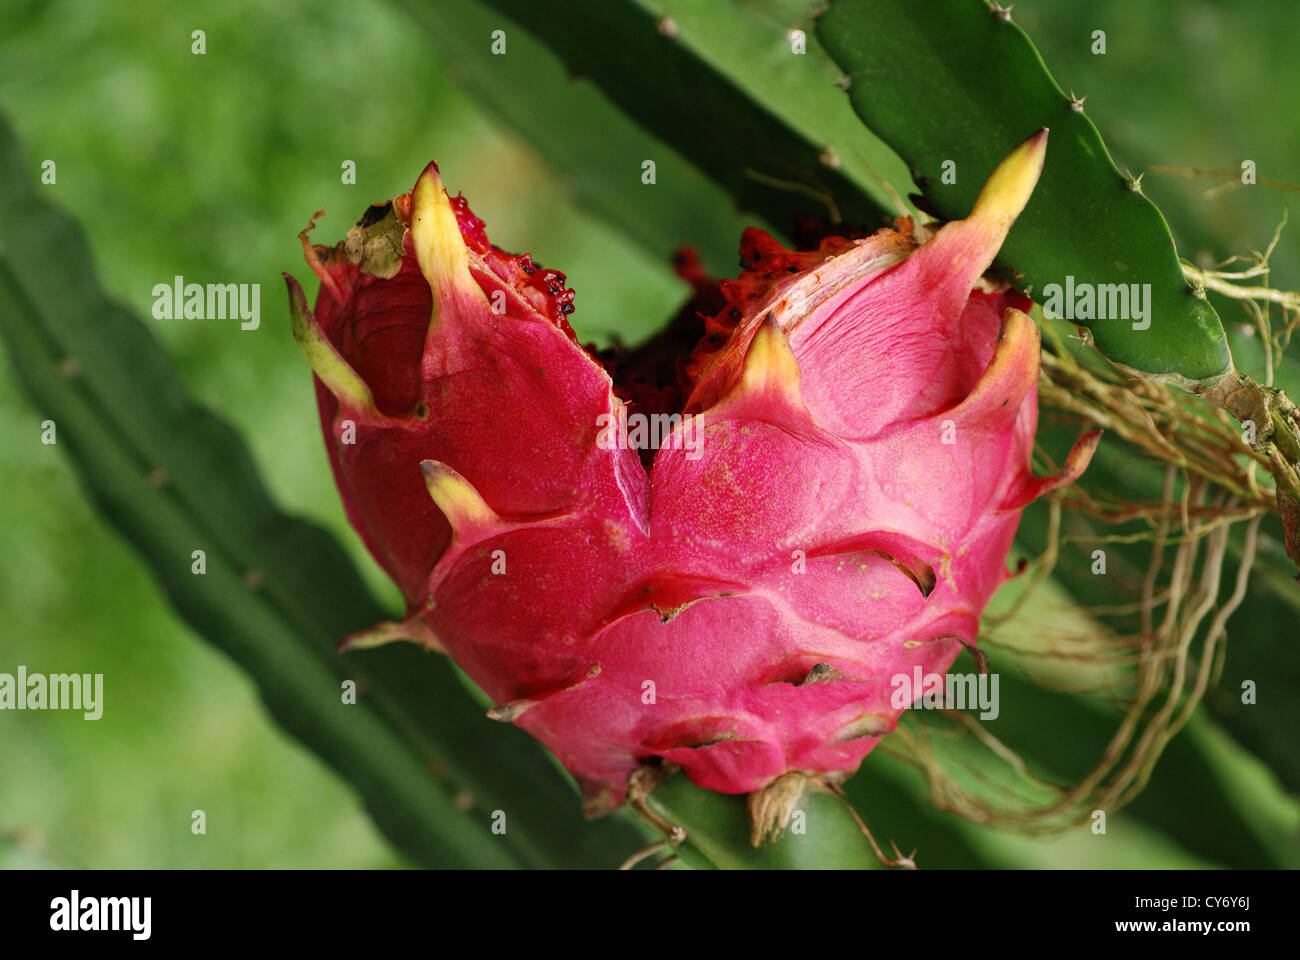 red dragon fruit in the gardens Stock Photo